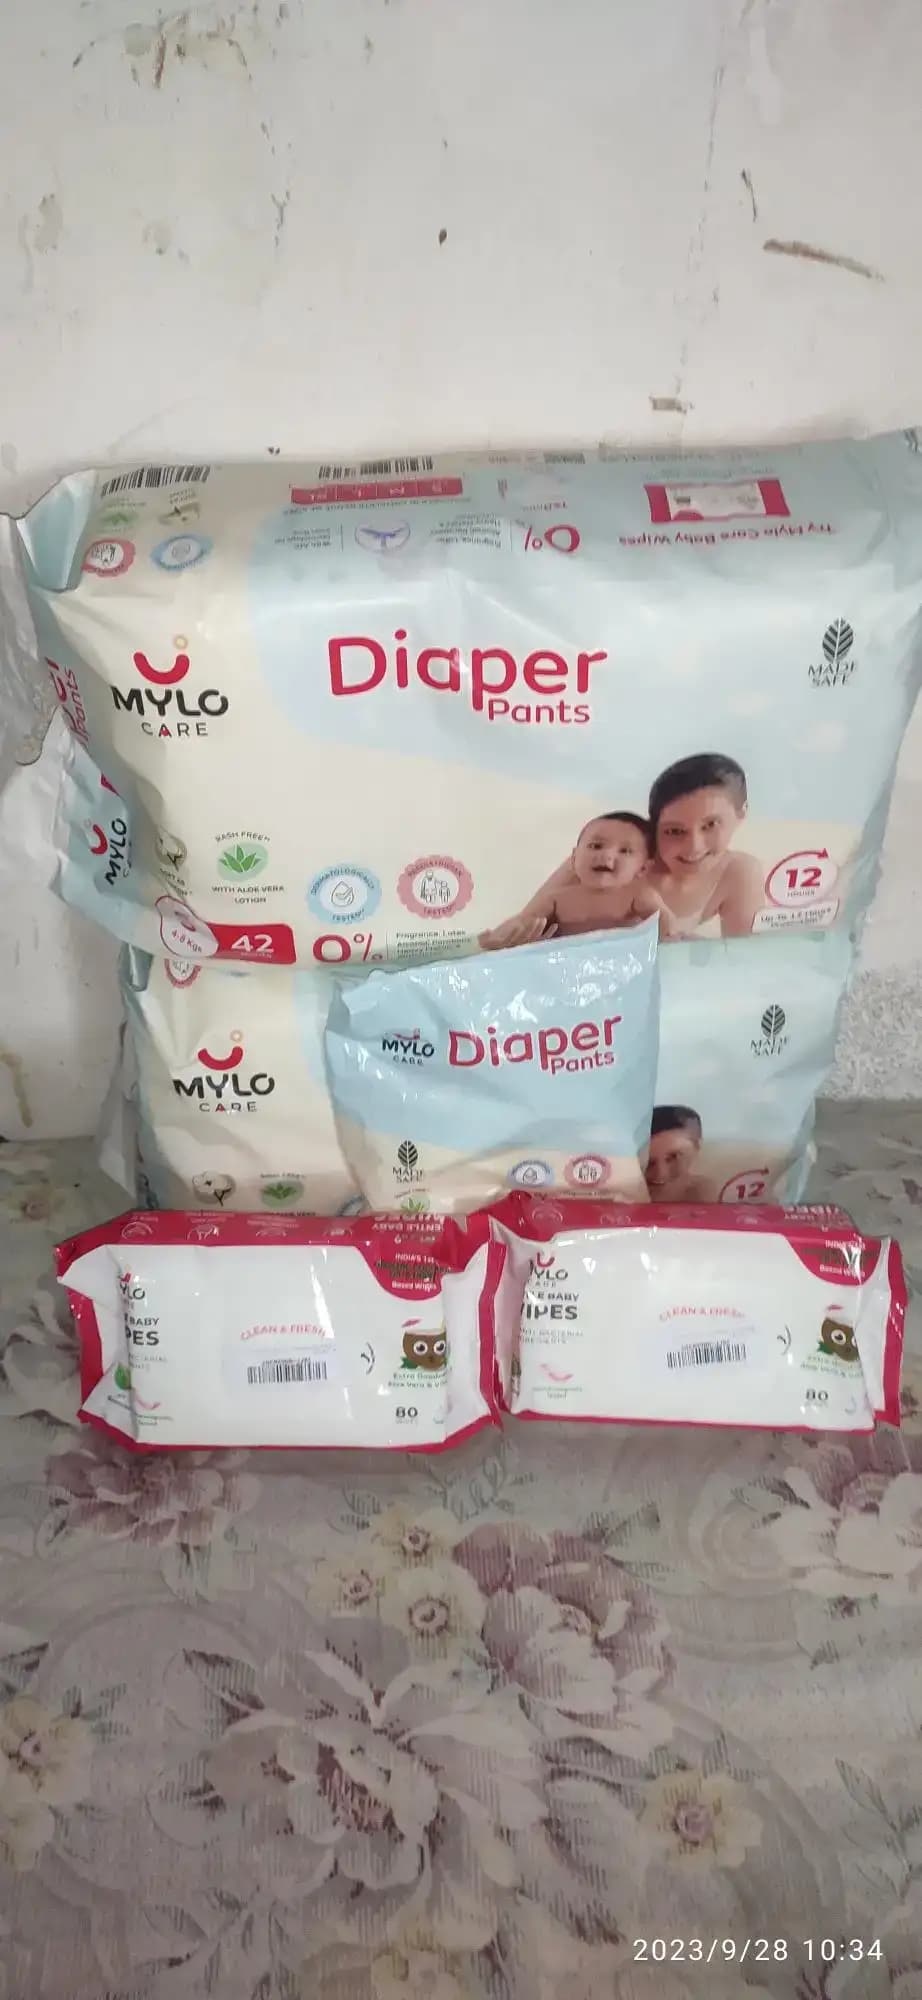 Super Saver Combo - Baby Diaper Pants Extra Large (XL) Size 12-17 kgs (56 count) Leak Proof + Baby Powder for Kids - 300 gm